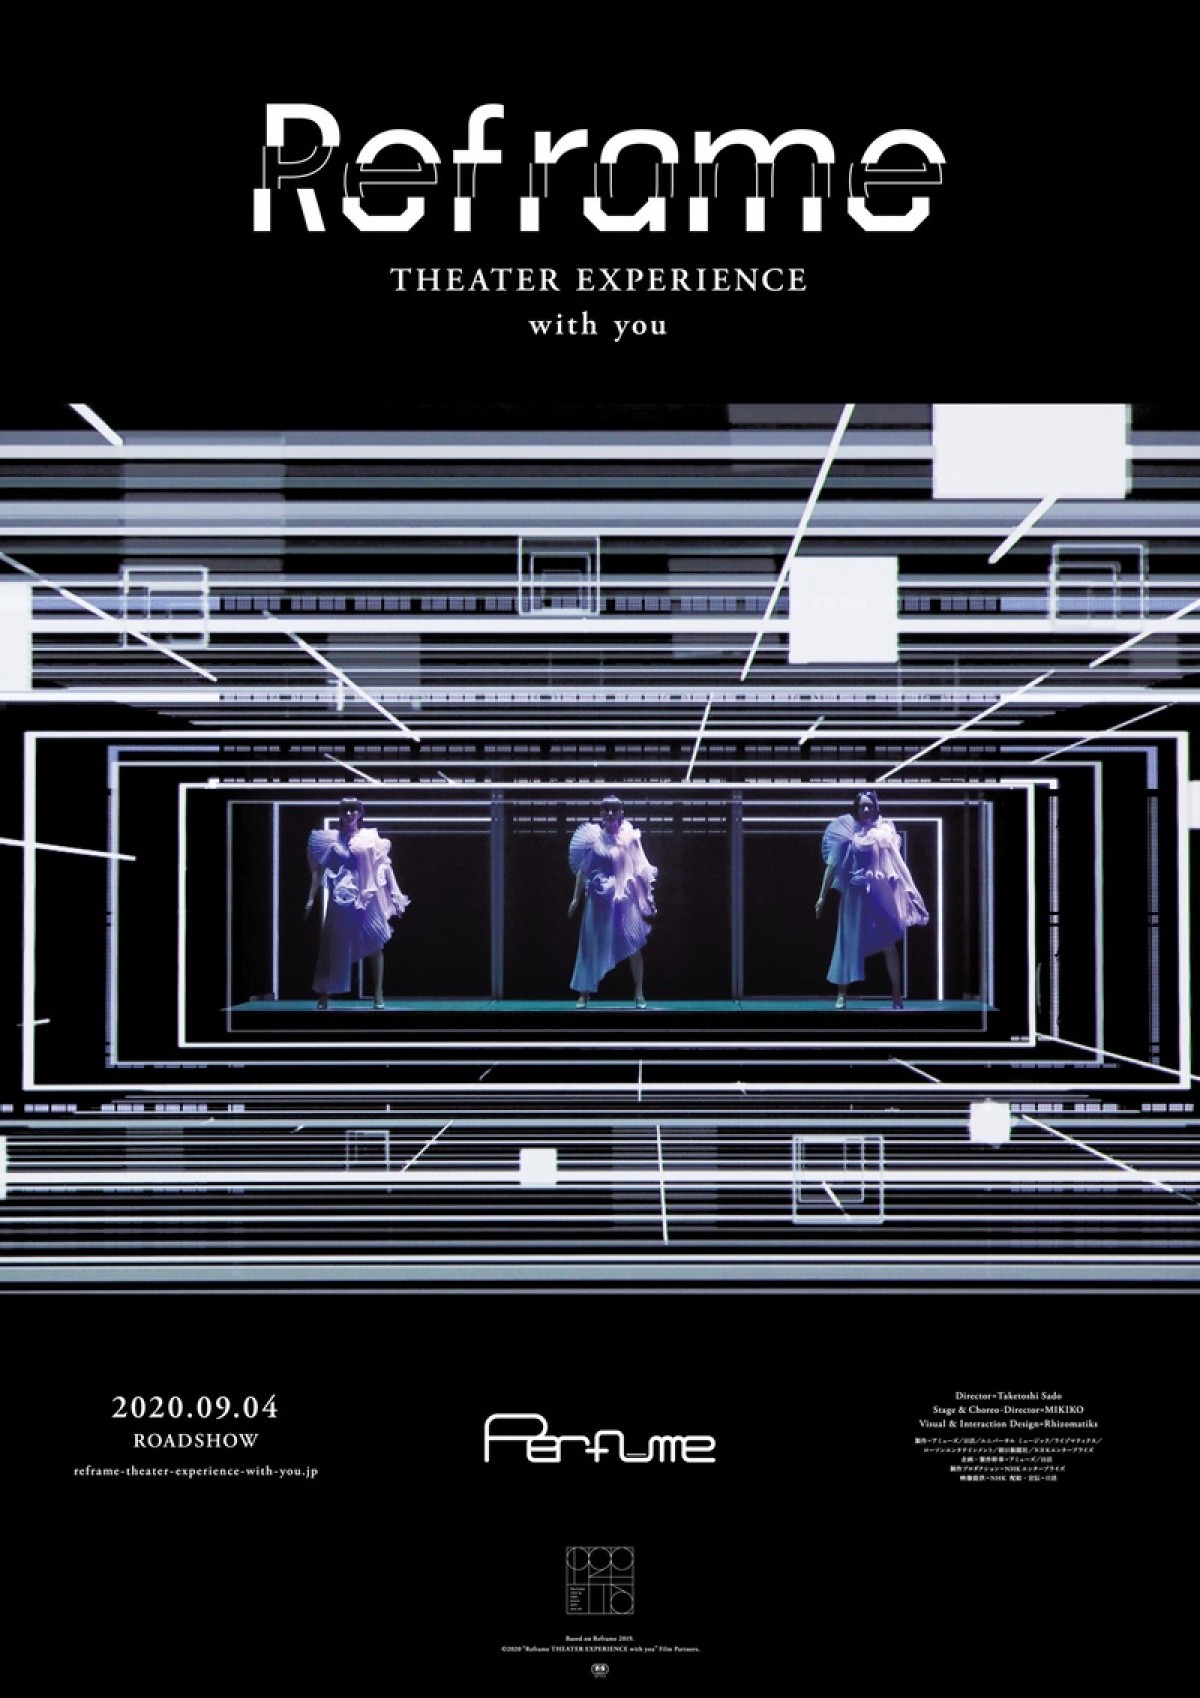 Perfumeによる劇場映画『Reframe THEATER EXPERIENCE with you』ポスタービジュアル